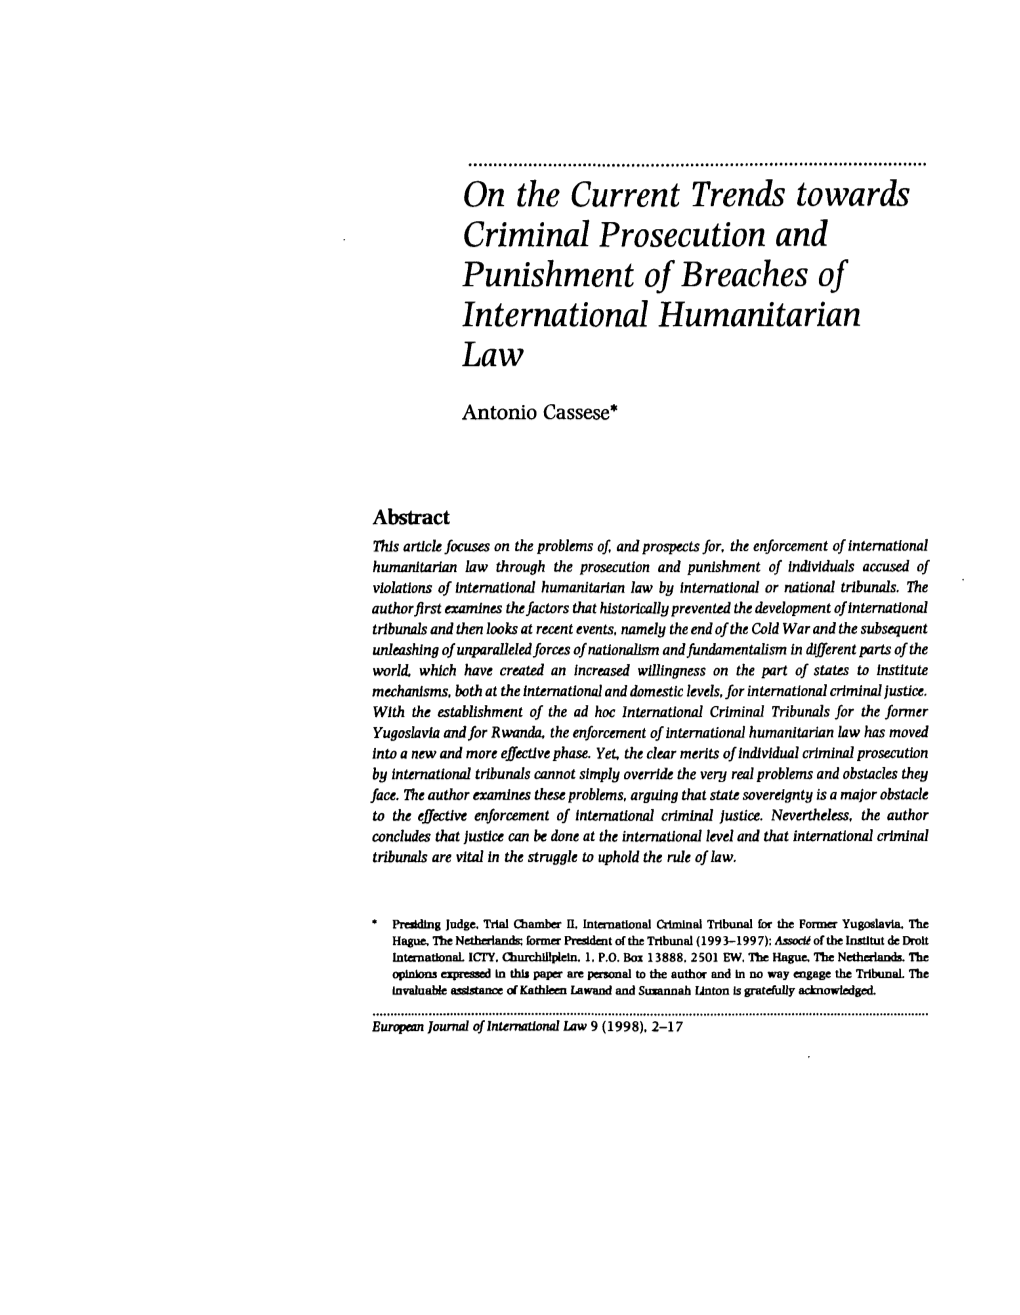 On the Current Trends Towards Criminal Prosecution and Punishment of Breaches of International Humanitarian Law